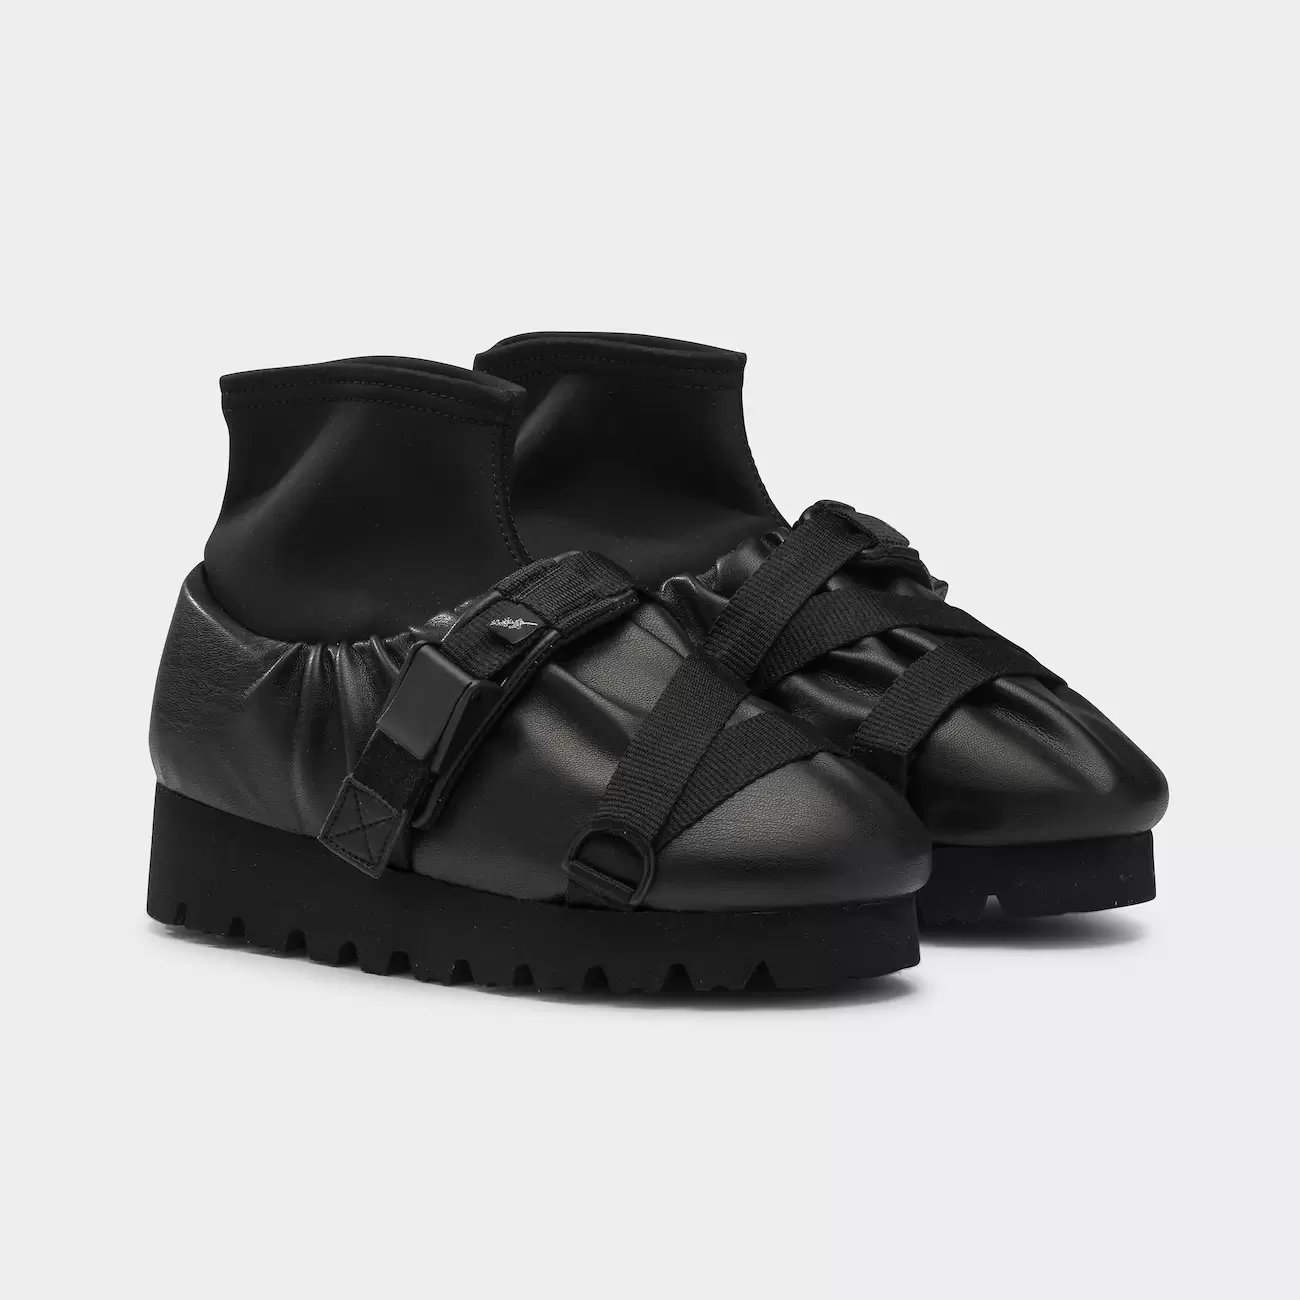 CAMP SHOES MID Black